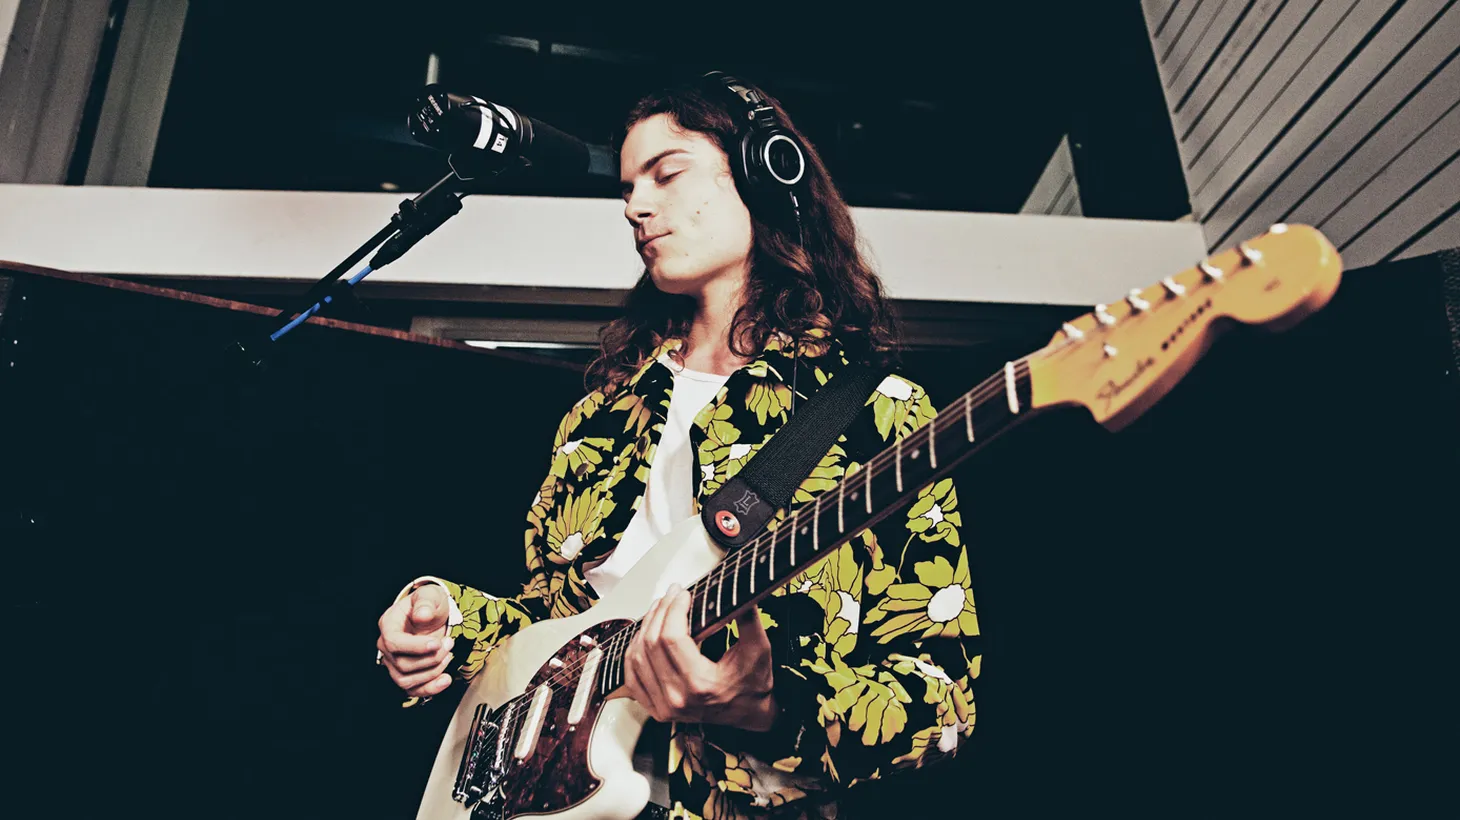 BØRNS burst onto the LA scene last year with an EP of undeniably catchy pop songs.